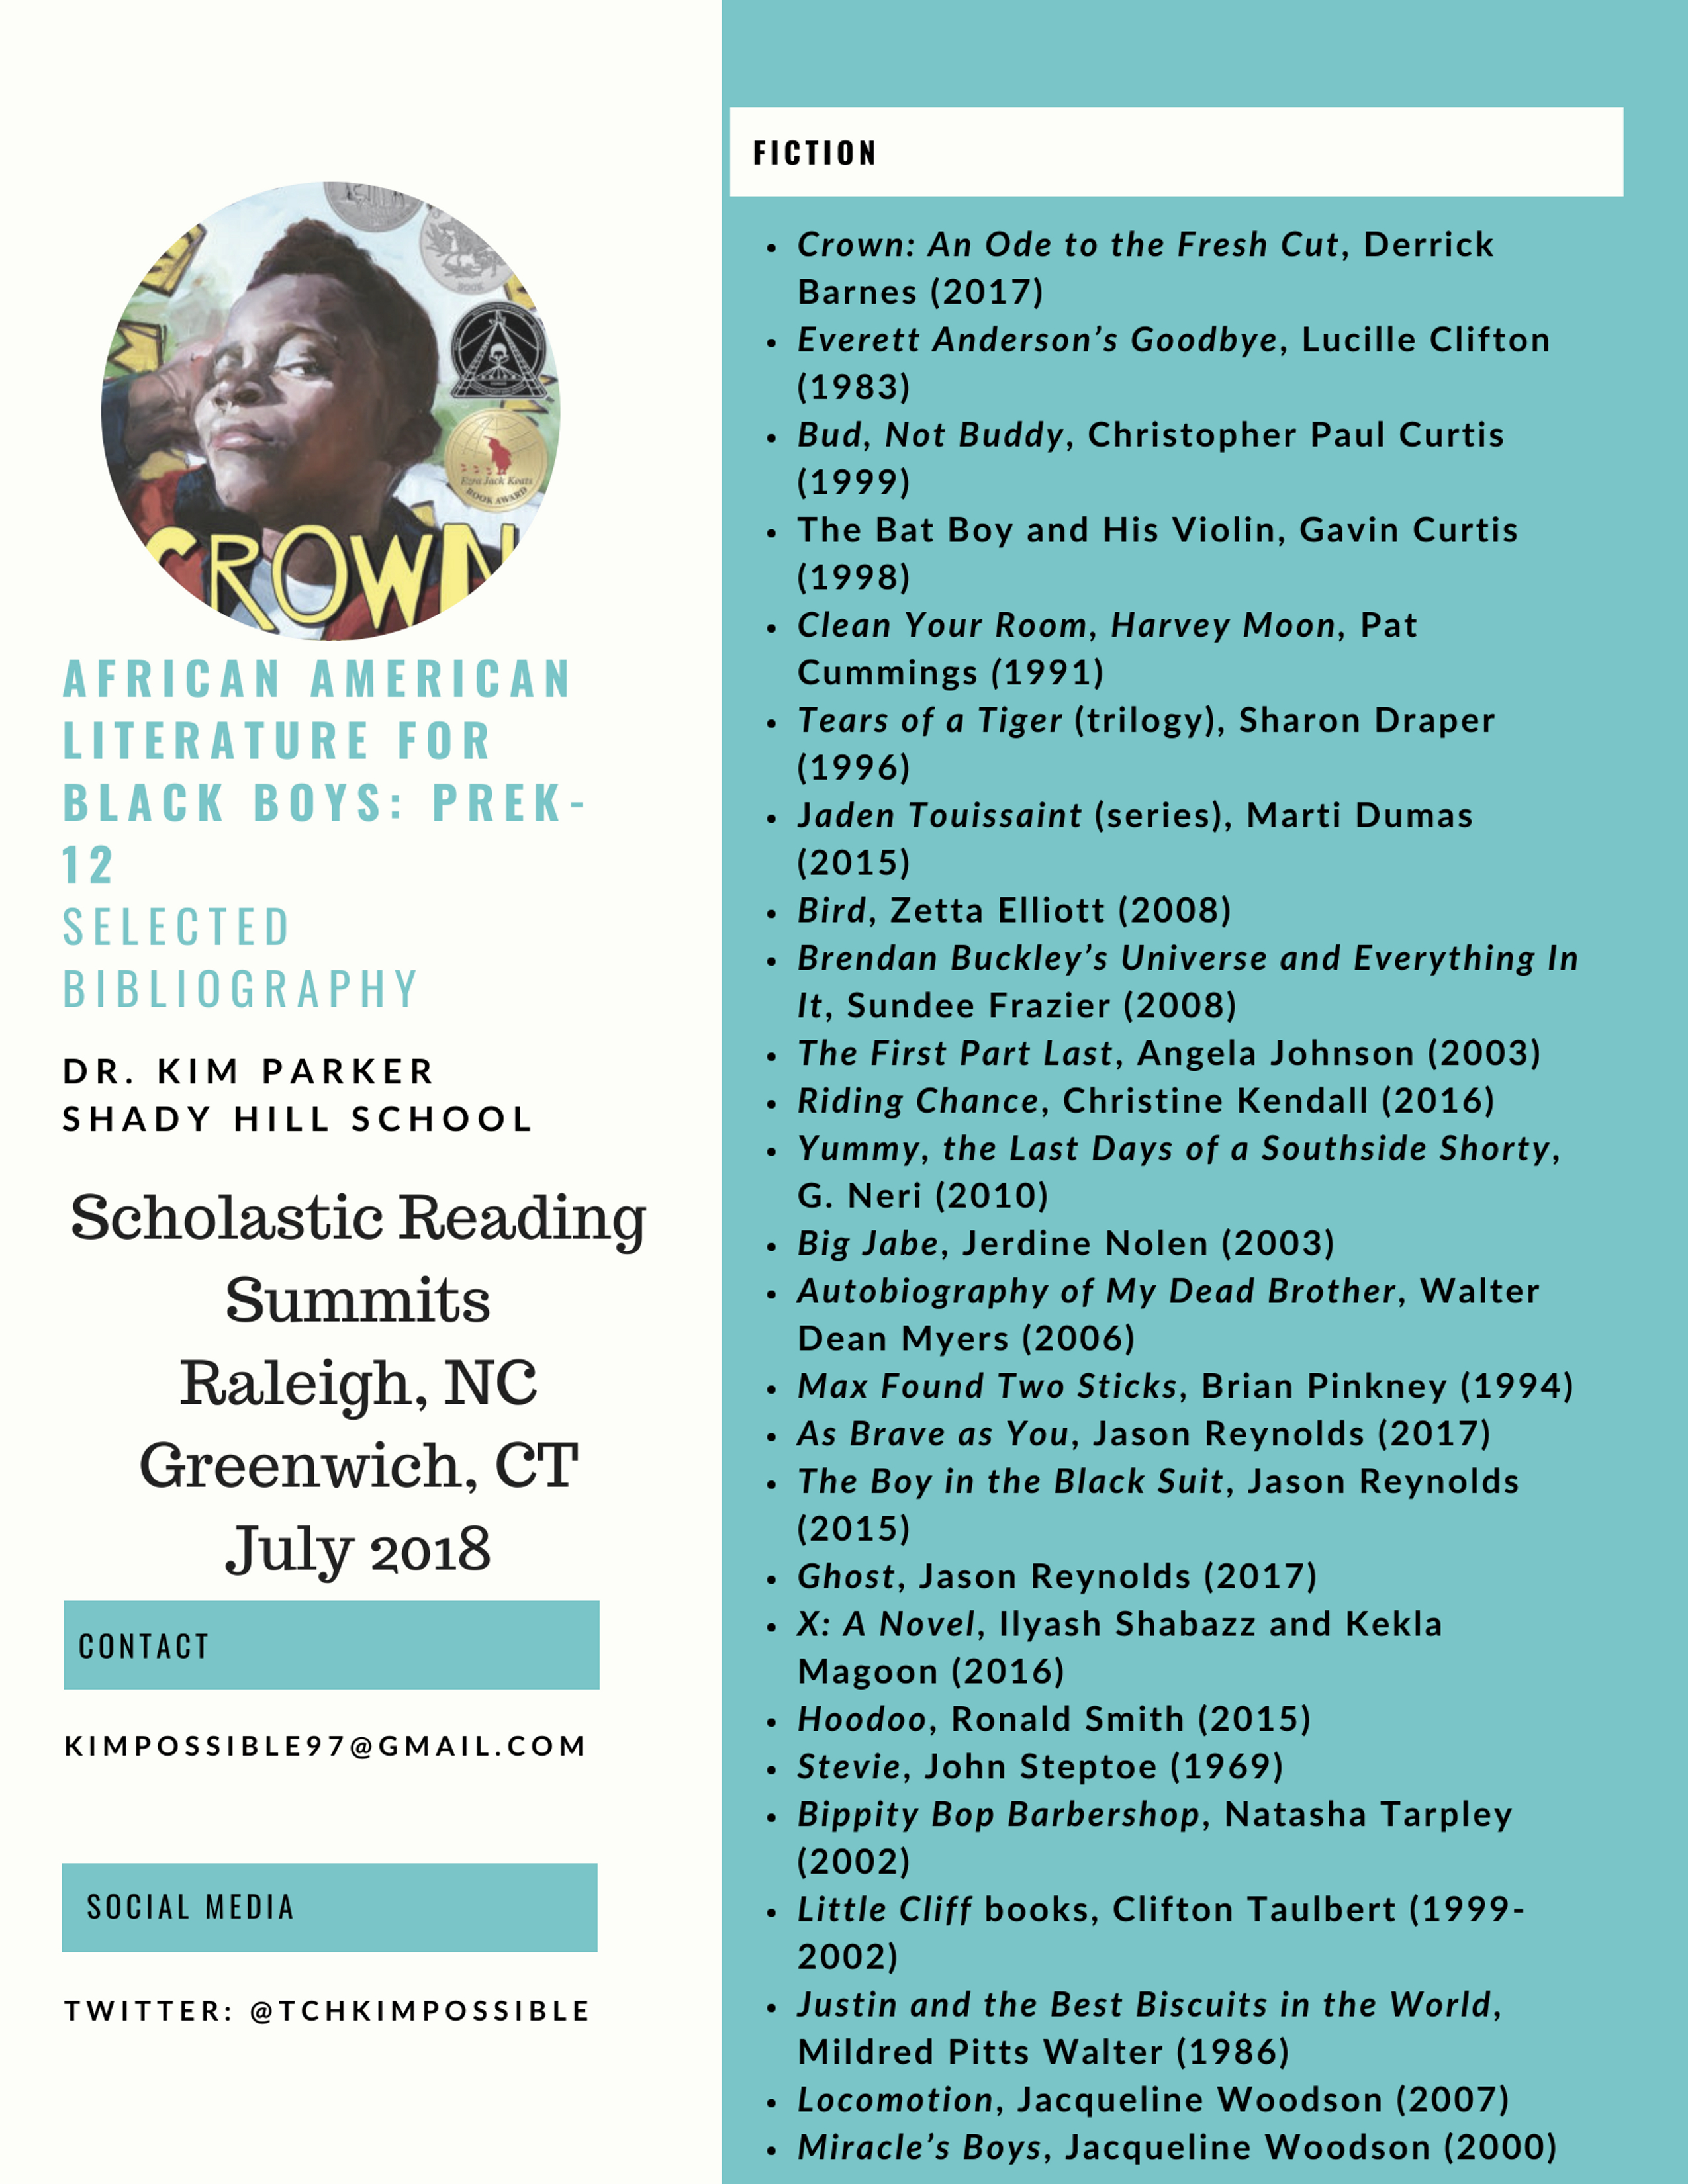 African American literature for black boys Bibliography_Scholastic (1)